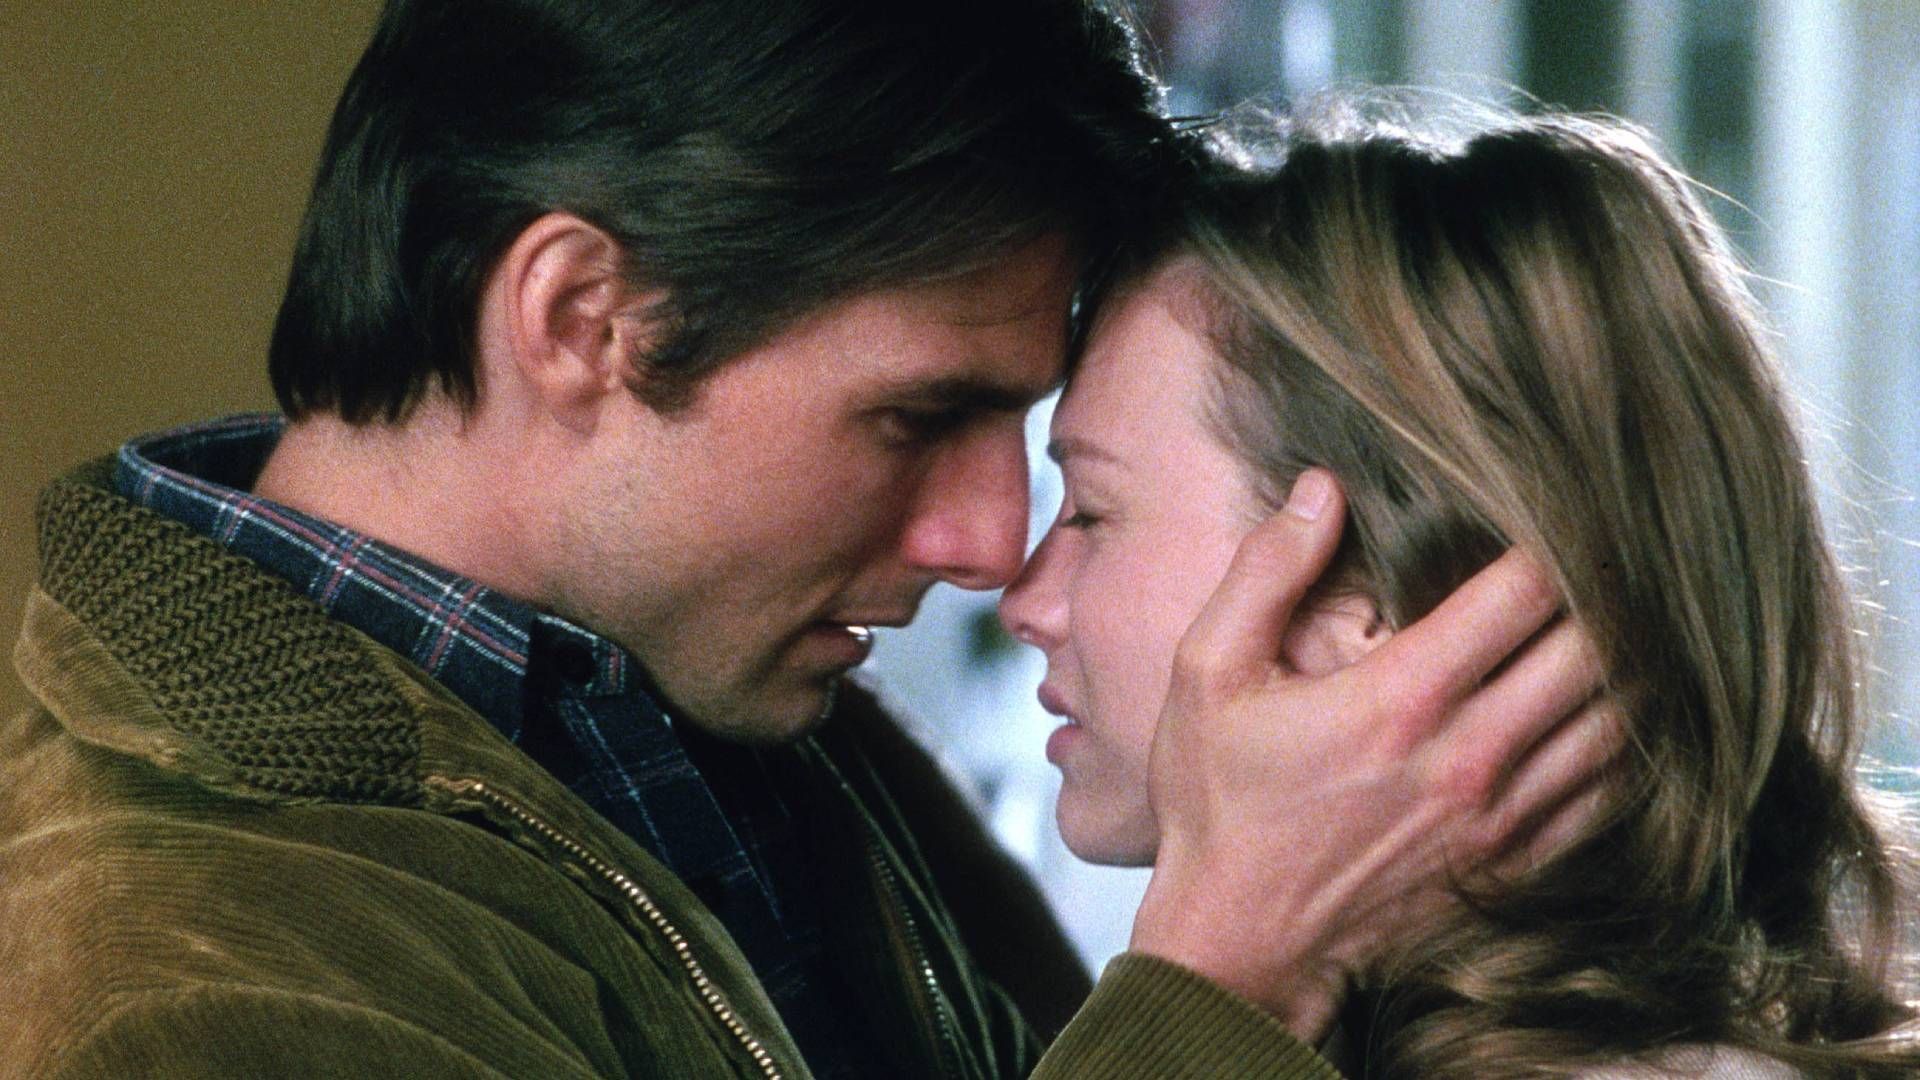 <p>                     Tom Cruise shows off his romantic comedy chops as a struggling sports agent in Jerry Maguire. He plays a man desperate to do things his own way after being fired for gaining a conscience while working at a cutthroat agency. But at the heart of the drama is a love story with Renée Zellweger’s Dorothy Boyd, who he makes a tearful confession of love to near the end of the movie. "You complete me," he tells her, before she replies the endlessly quotable response: "Just shut up, you had me at hello." It’s undoubtedly one of the most romantic scenes of Cruise’s career.                   </p>